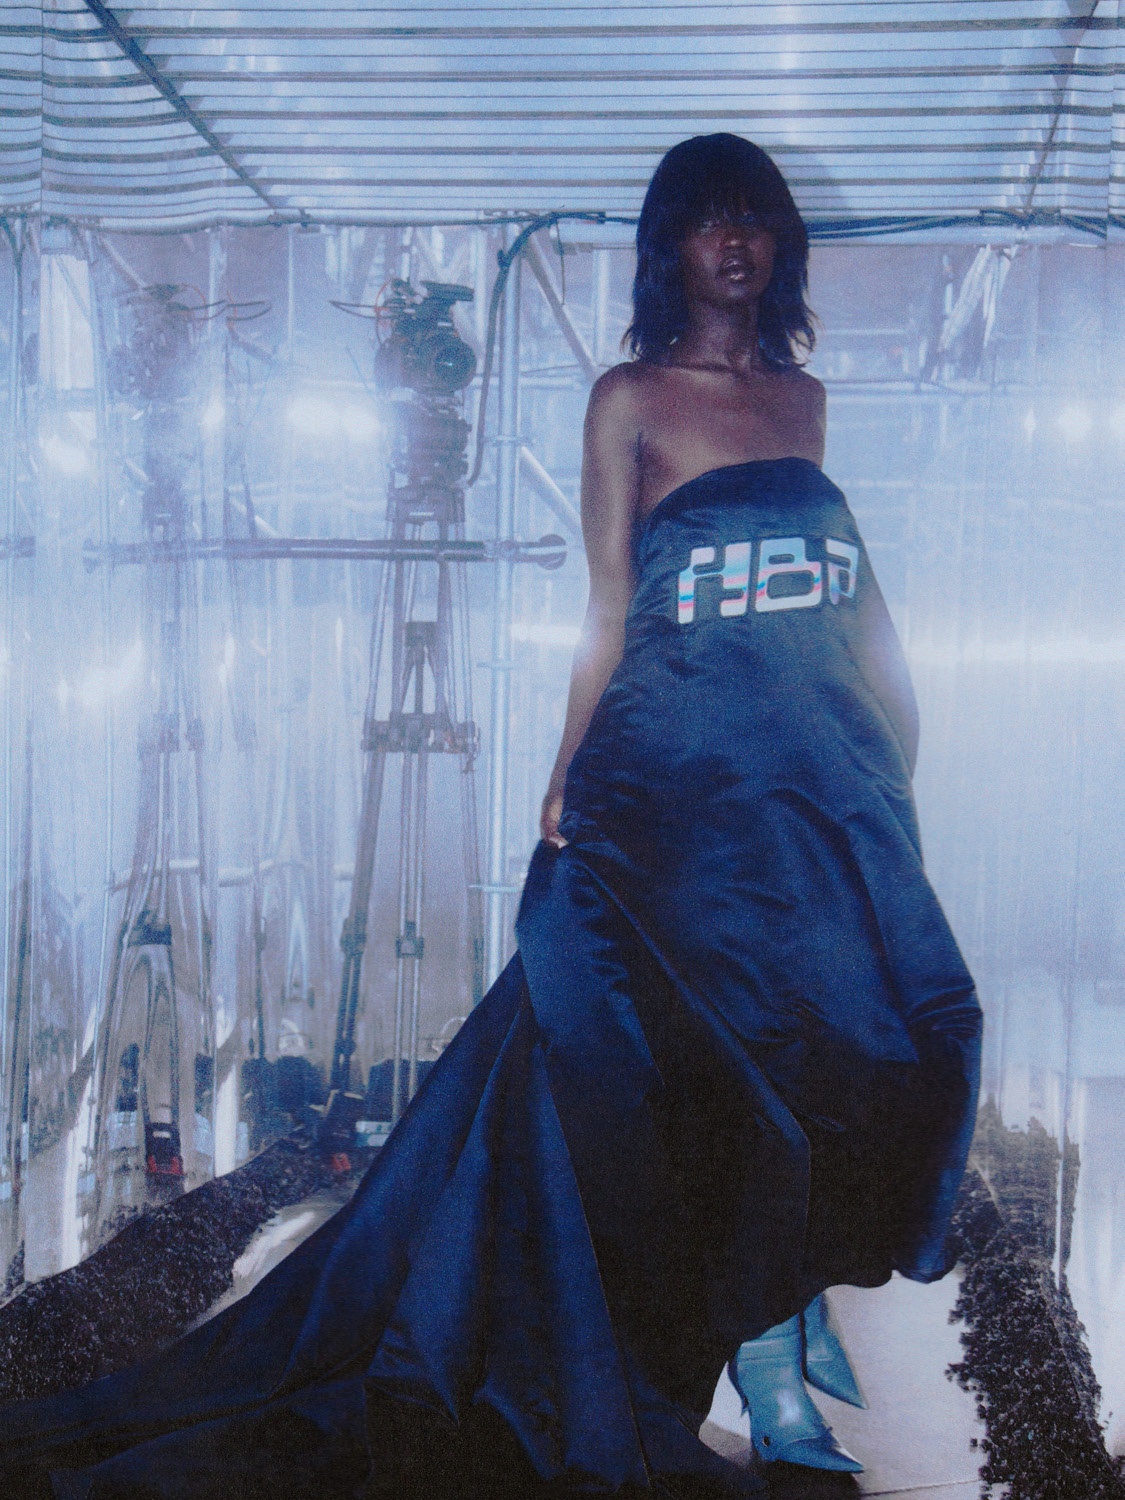 A model in a long black, shoulderless dress stands in front of a scaffolding structure draped in plastic and lit with bright white lights.